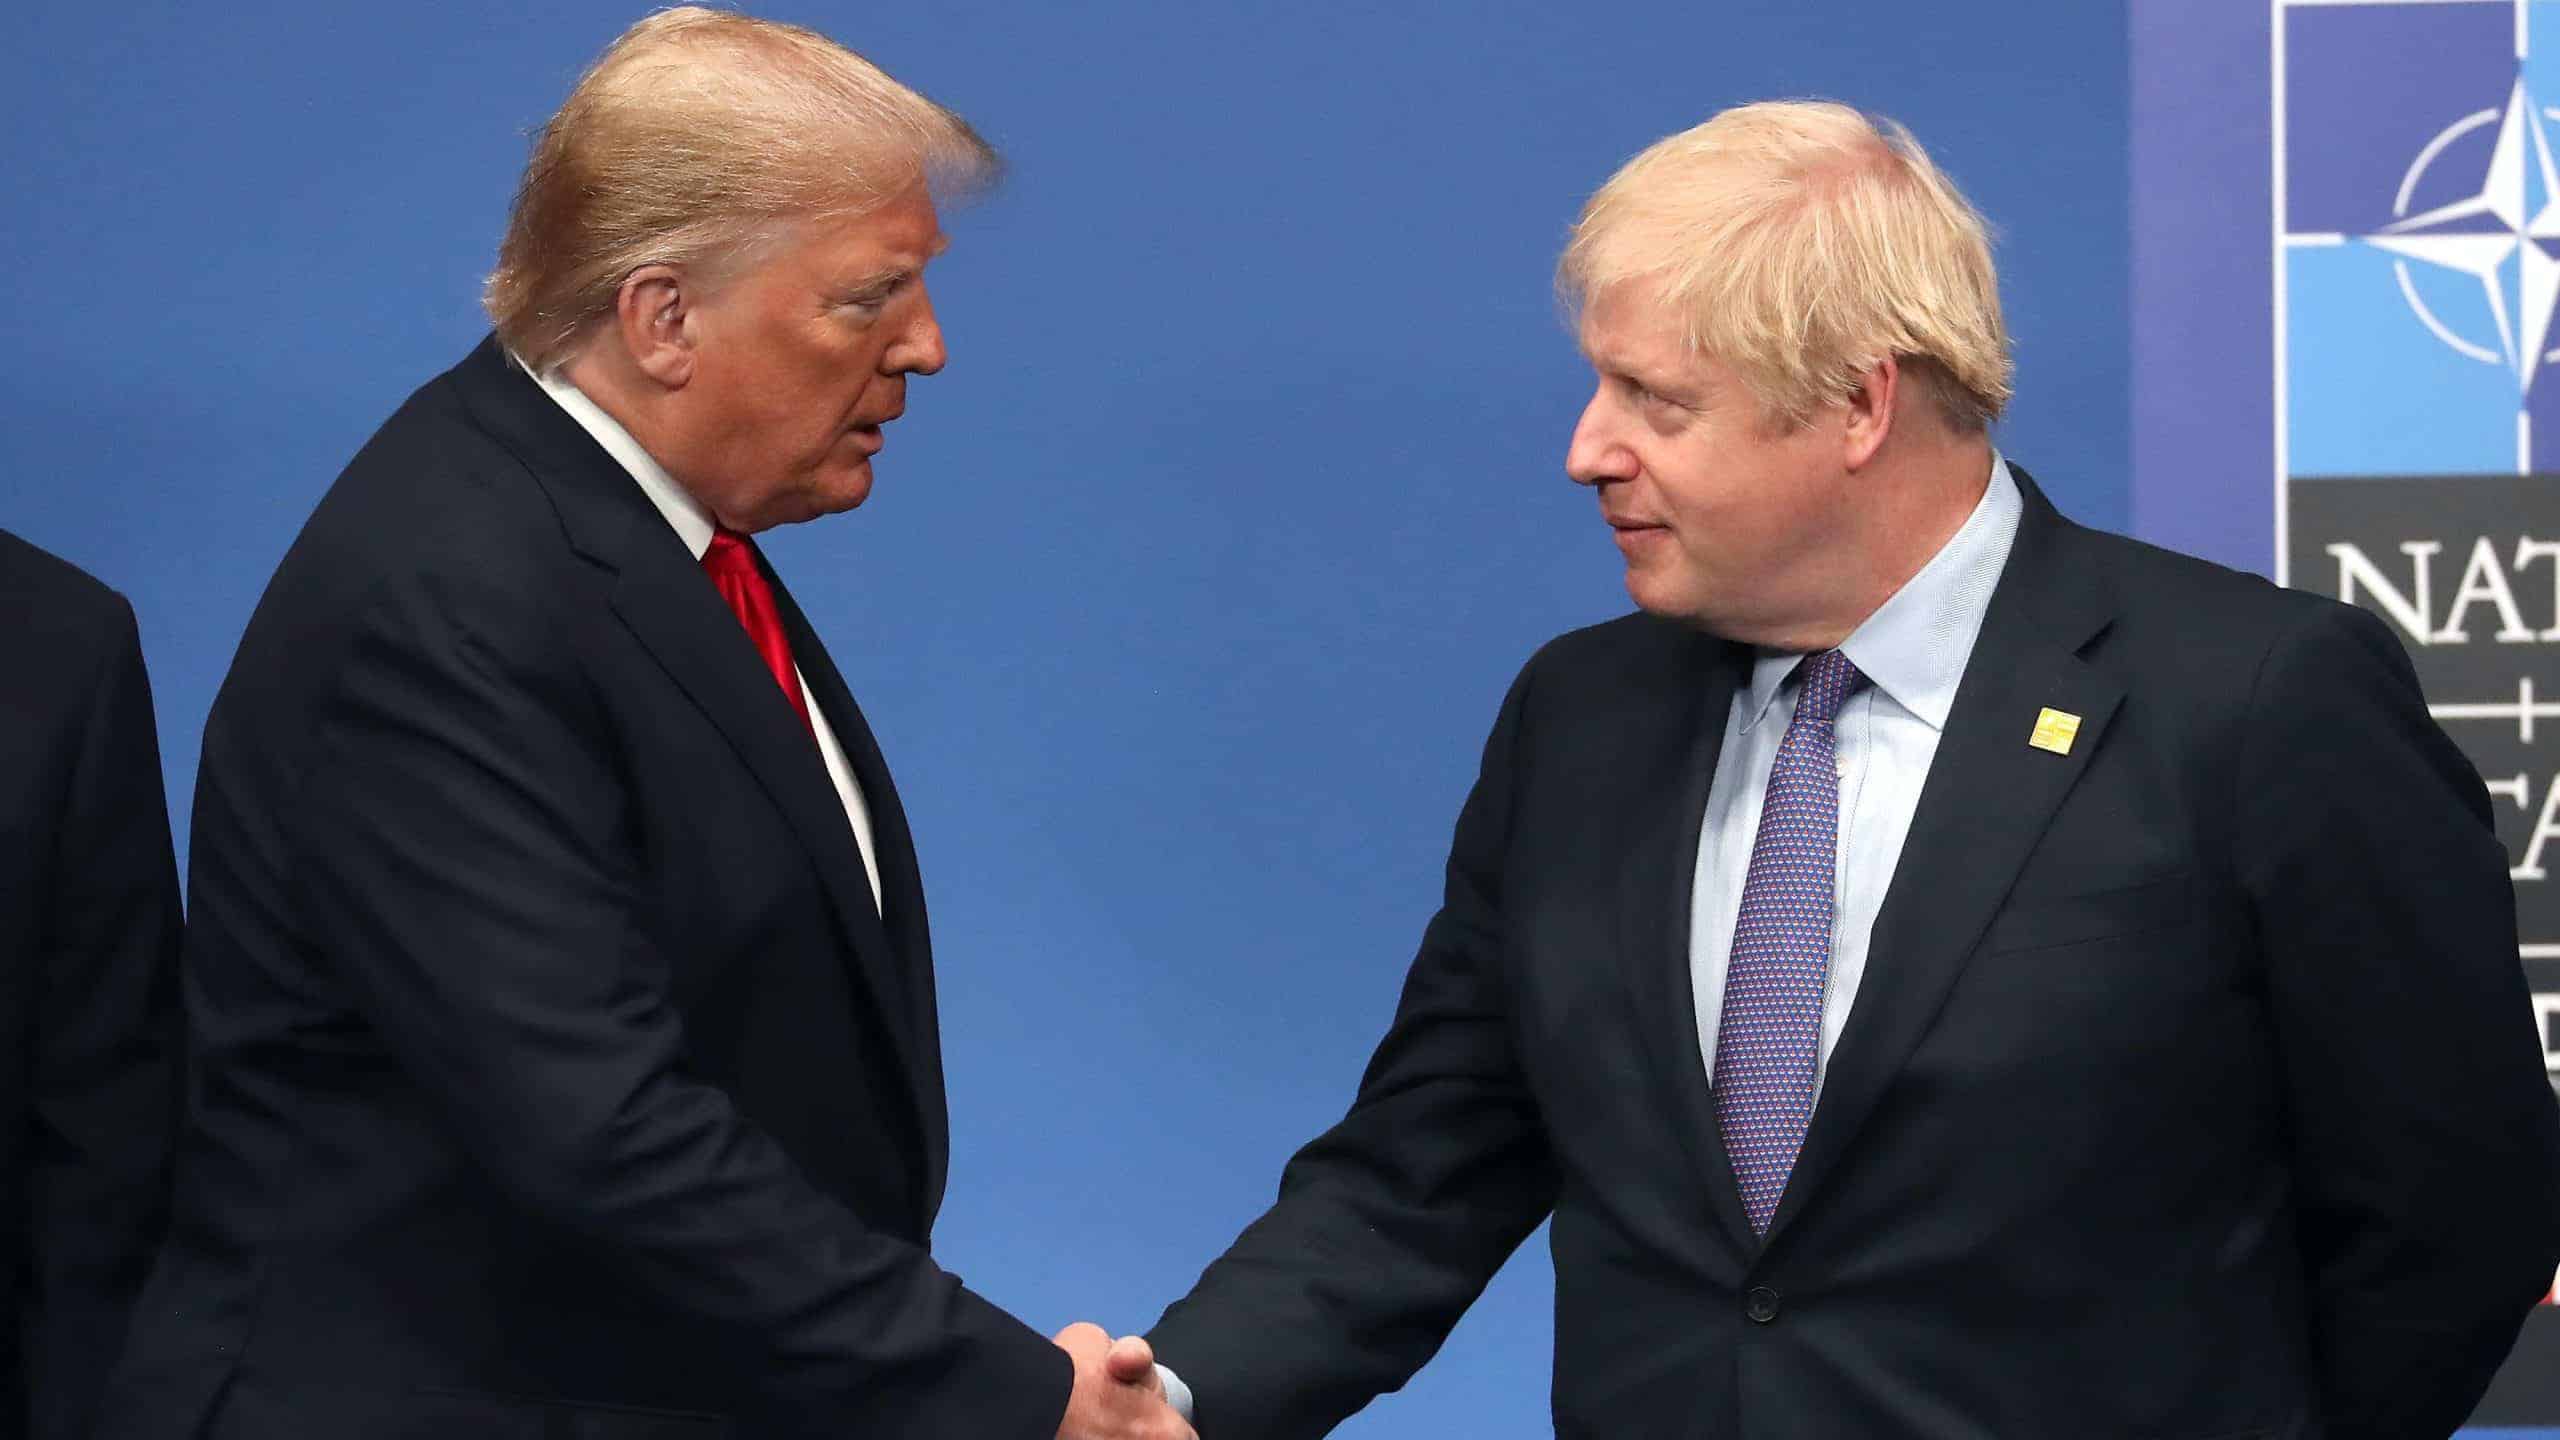 PM’s “chaotic” handling of Brexit talks has aspects of Donald Trump, says former US ambassador